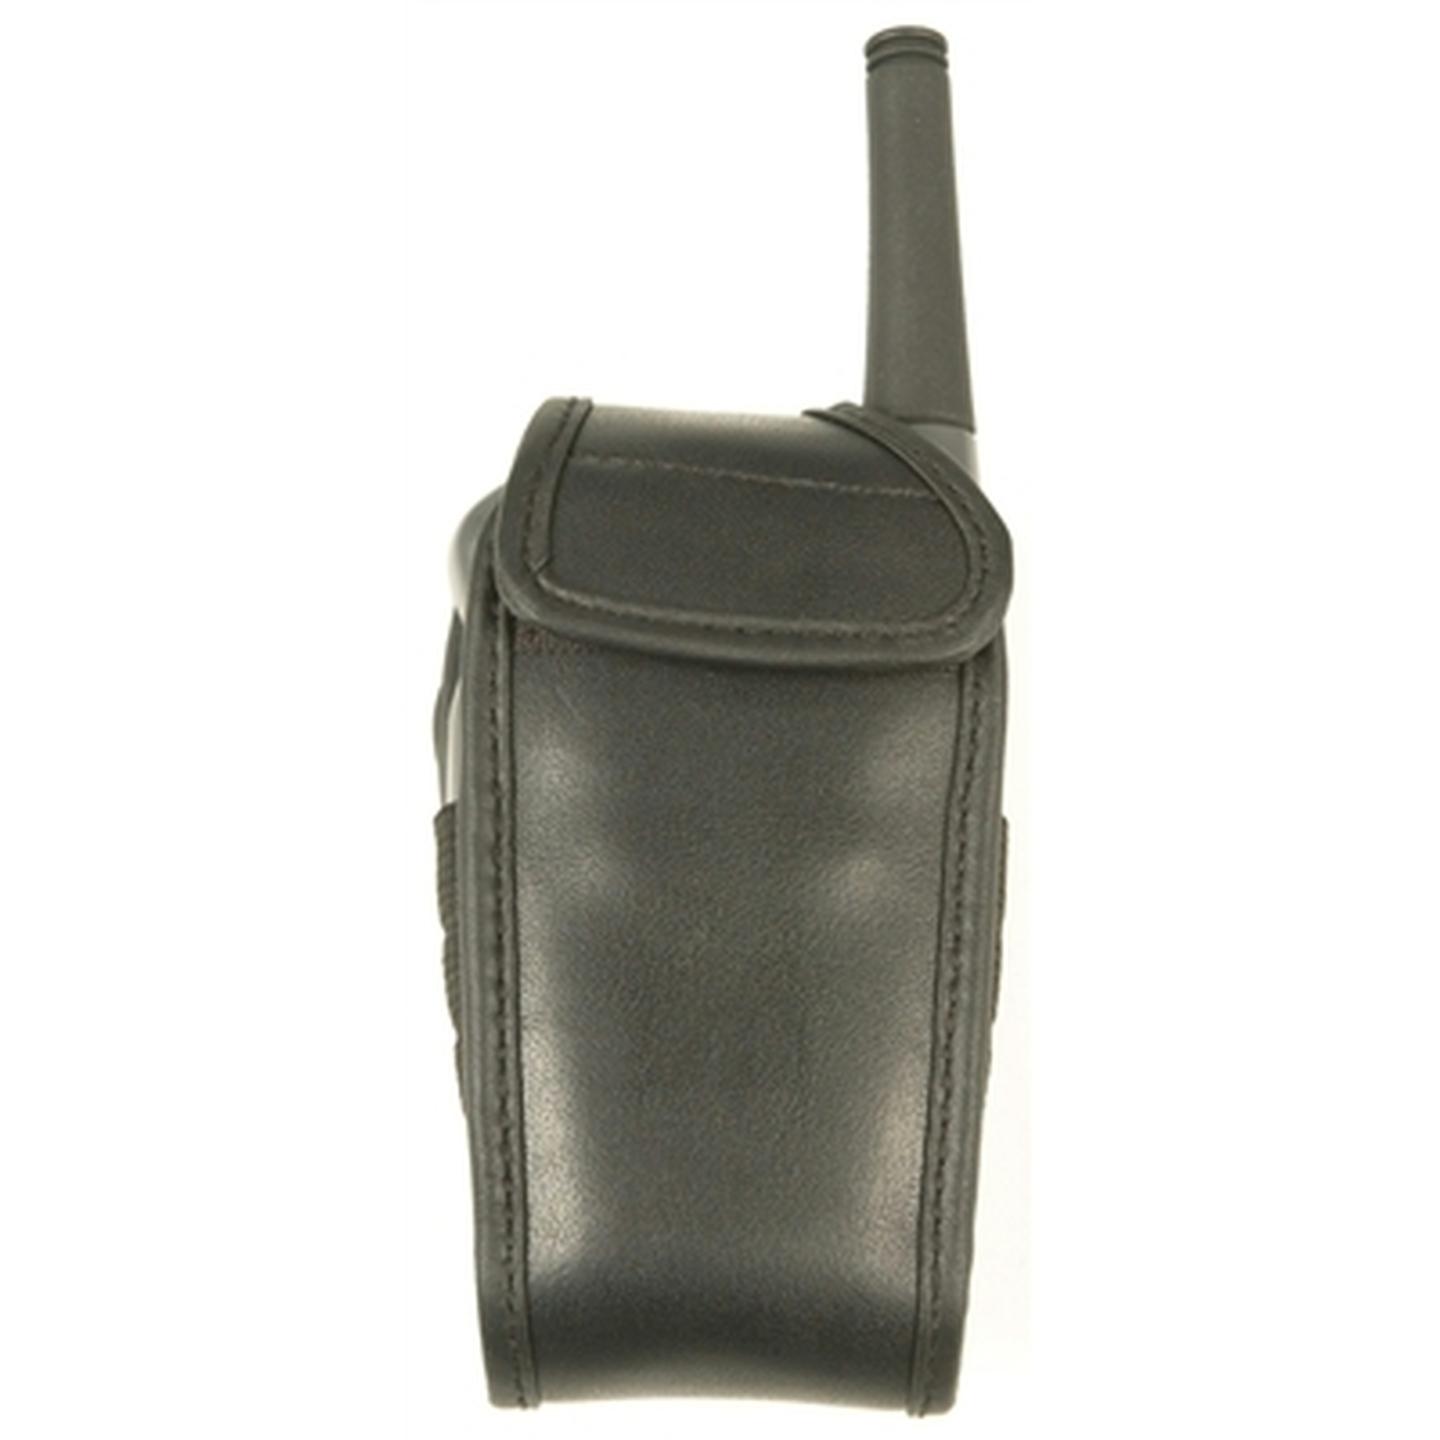 Black Leatherette Pouch for 0.5W UHF Transceivers